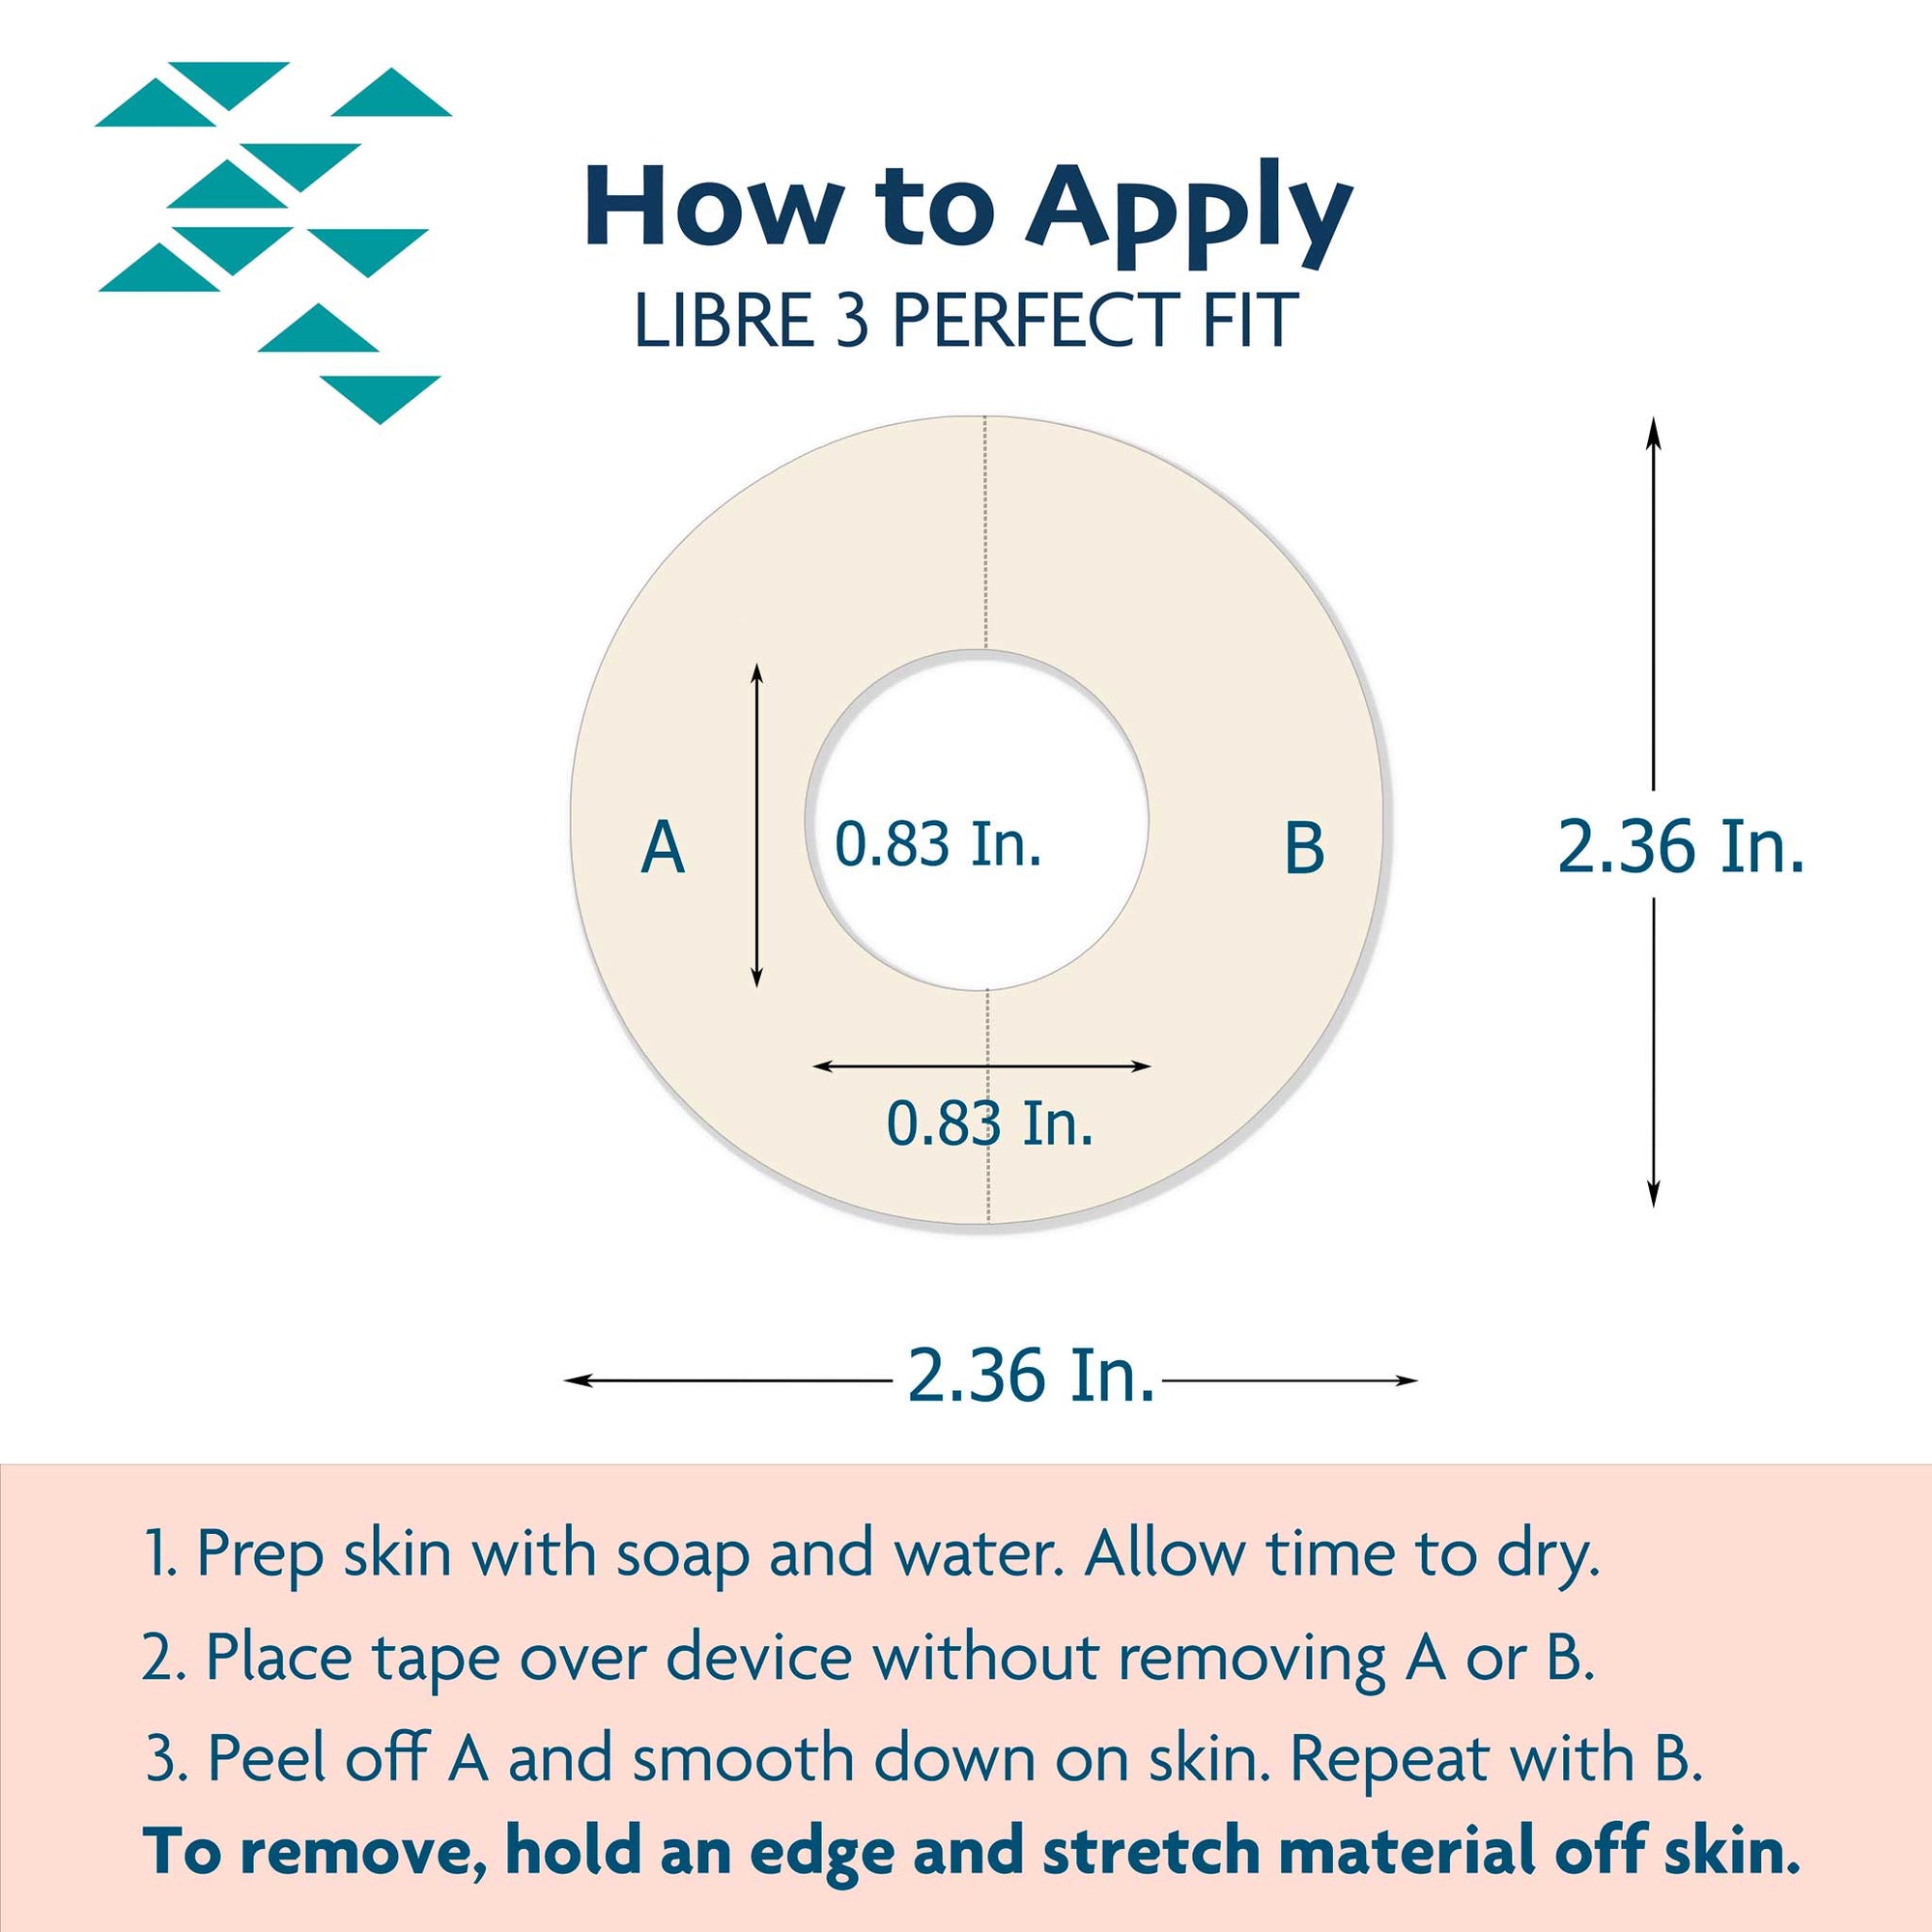 Libre 3 Perfect Fit Adhesive Patch Application Instructions and Dimensions